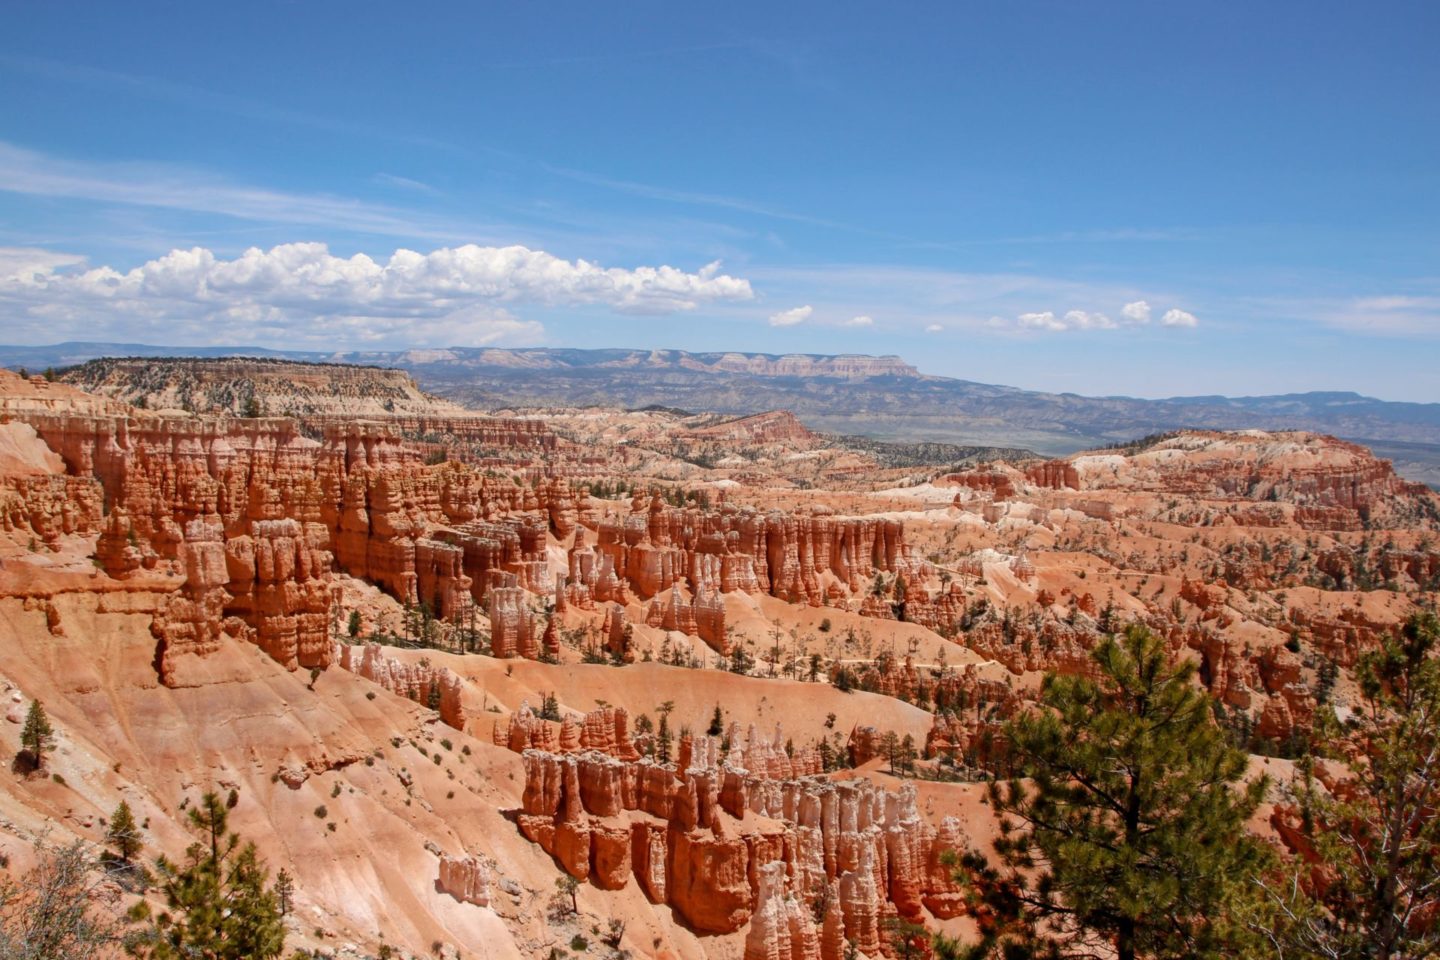 Bryce Canyon National Park - Orange bluffs and pine trees. Enter the park for $30 or use your America The Beautiful Pass